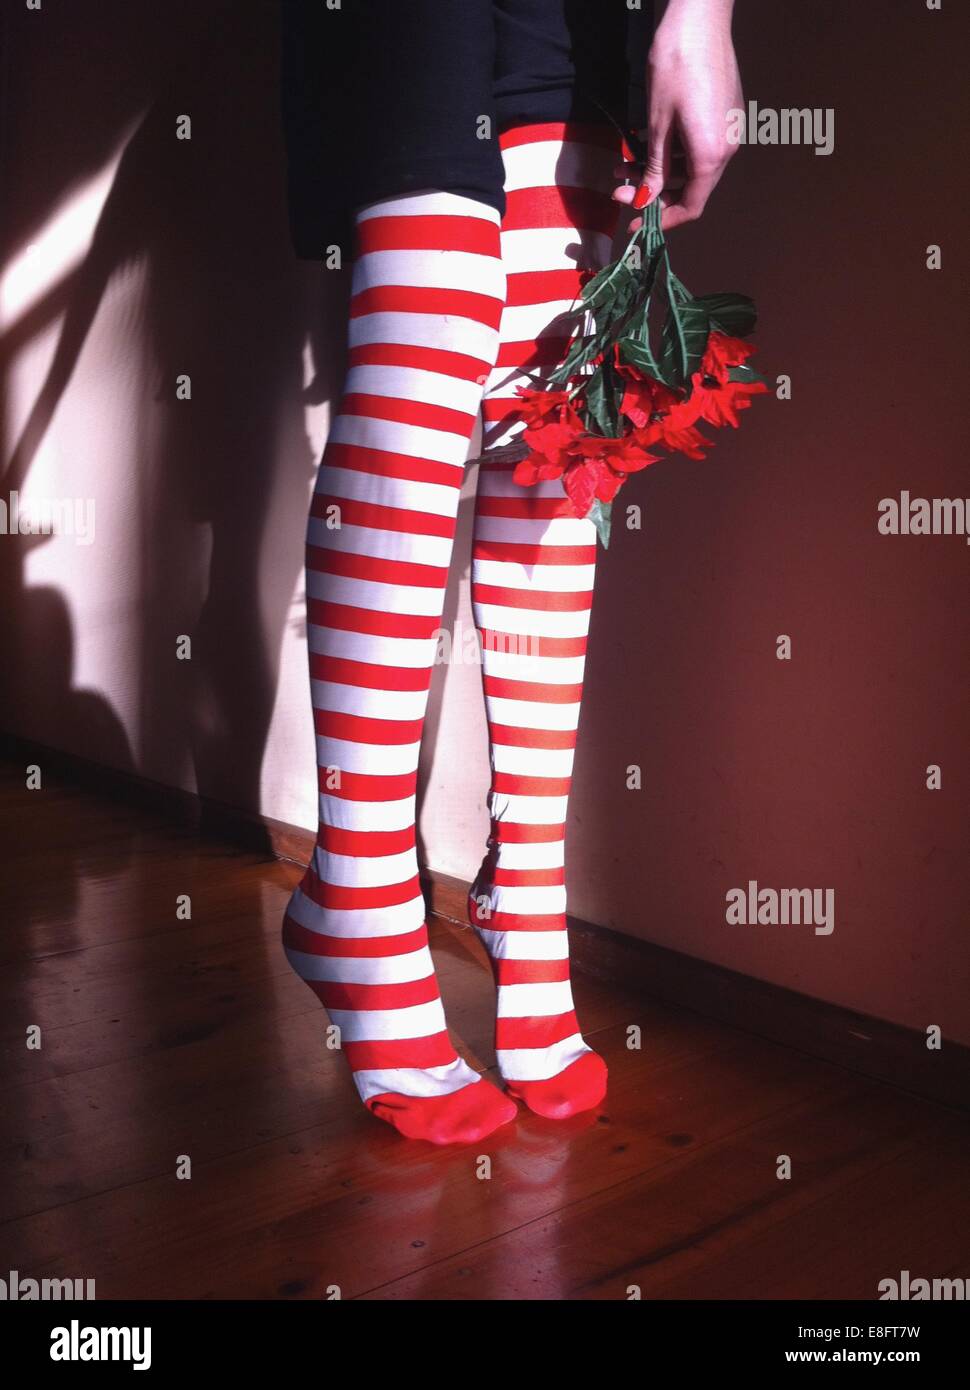 Legs in striped tights Stock Photo